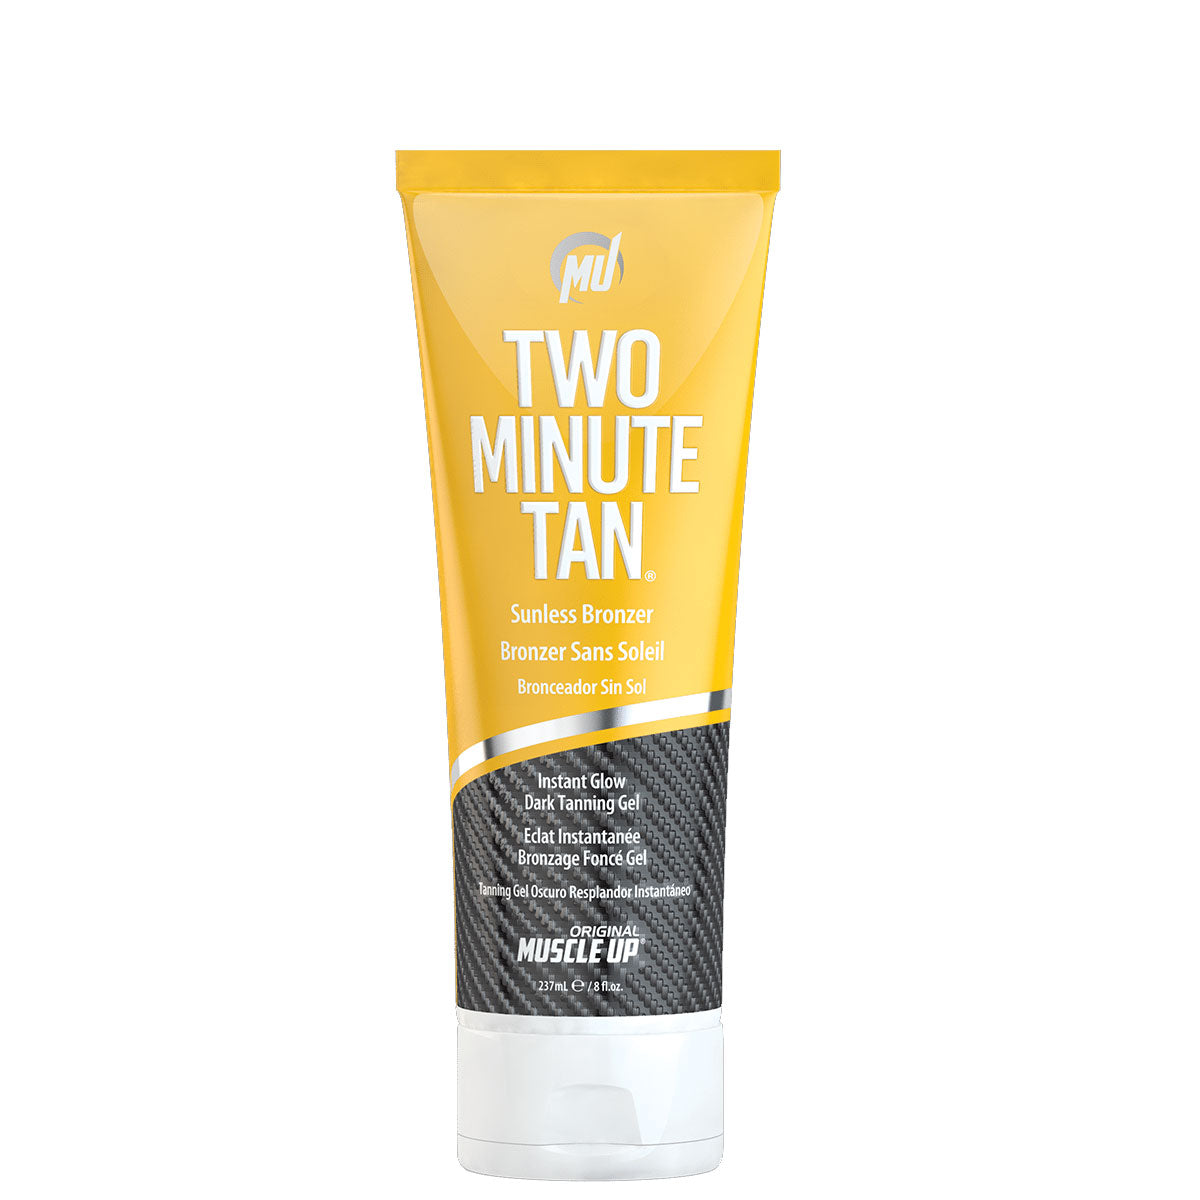 Getting a tan (real or fake) is my #1 recommended to boost your appearance quickly!